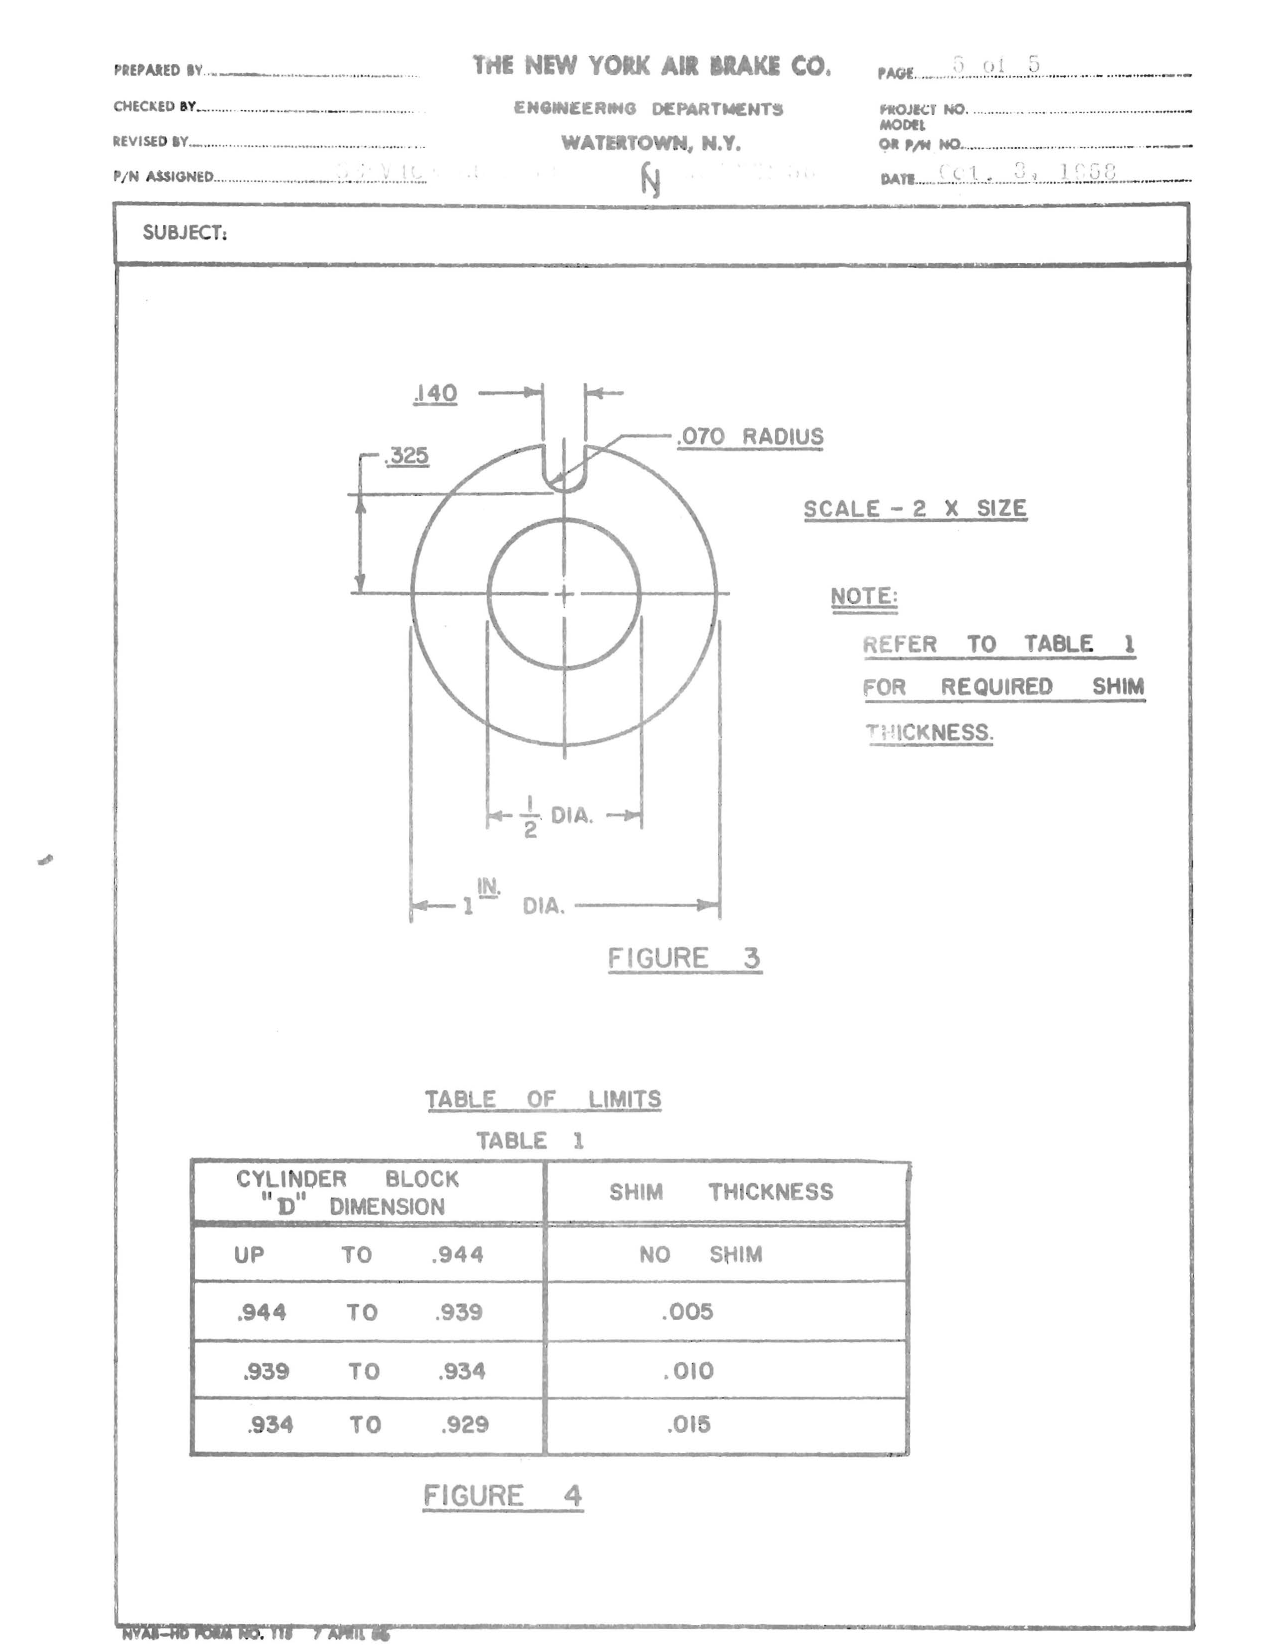 Sample page 5 from AirCorps Library document: Instructions for Installation of Shim under Cylinder Block Pivot Post to Increase Service Life of Cylinder Block - 65WC06001 Pump